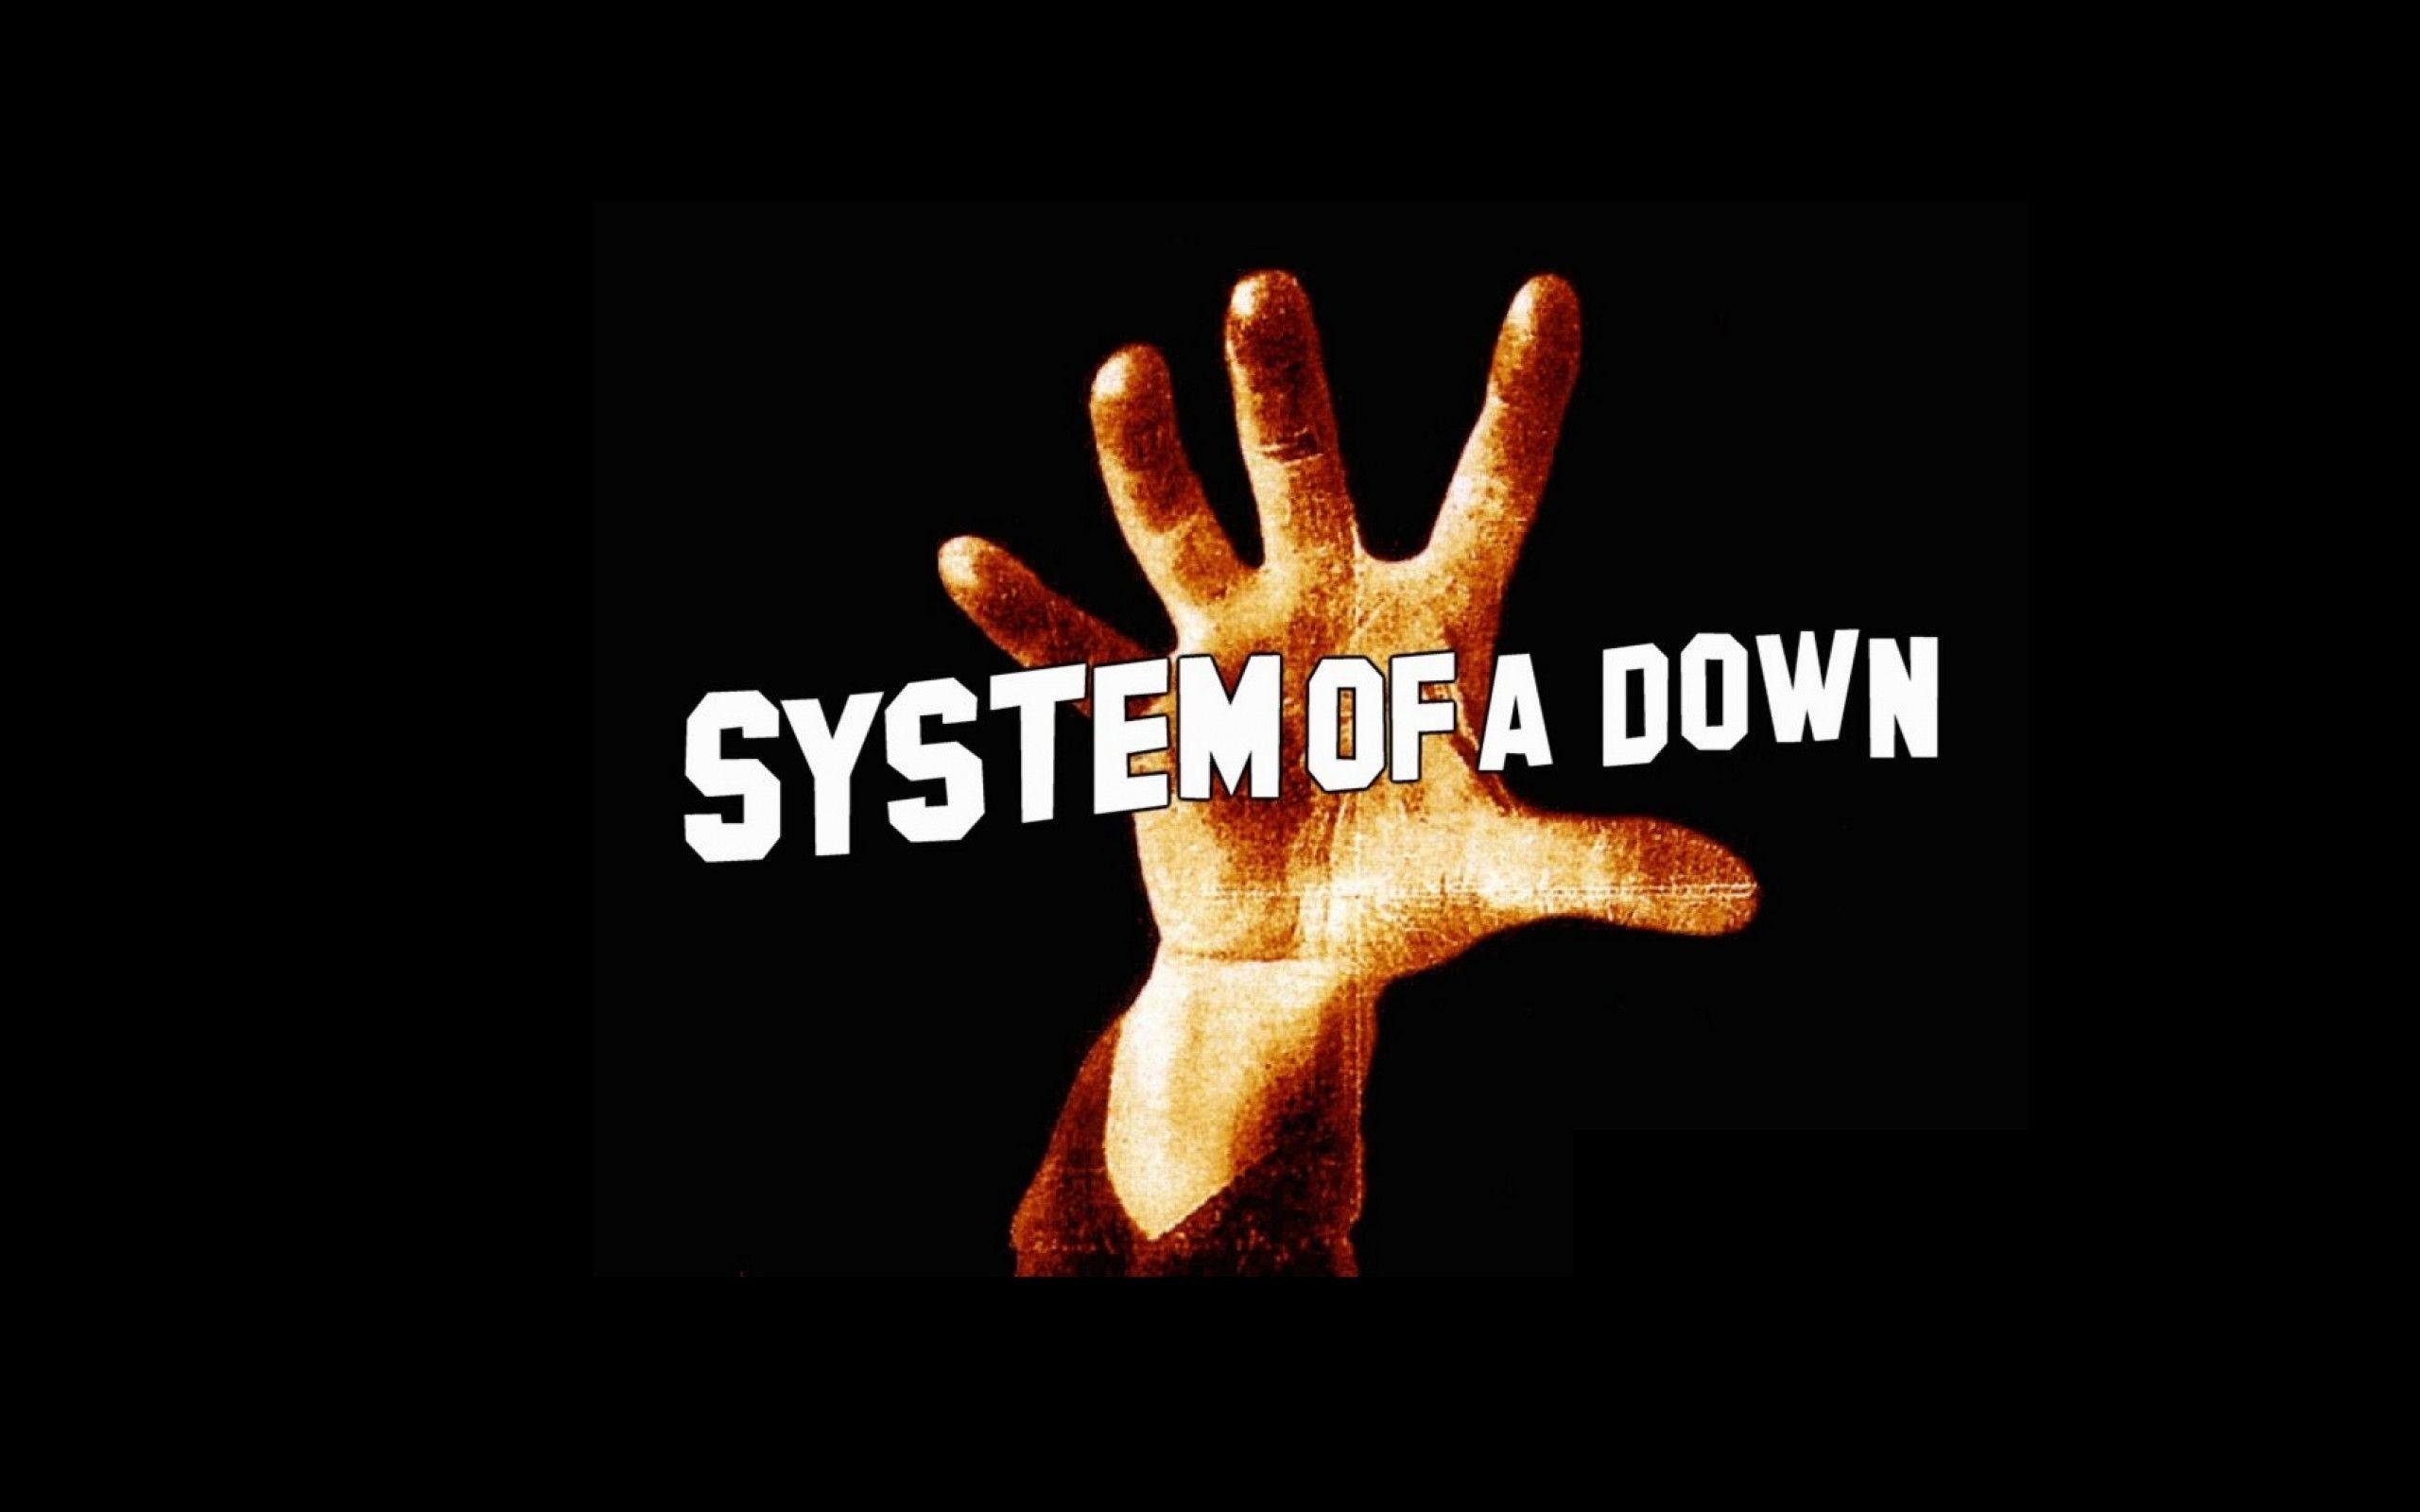 System of a Down Logo - System Of A Down Wallpapers - Wallpaper Cave